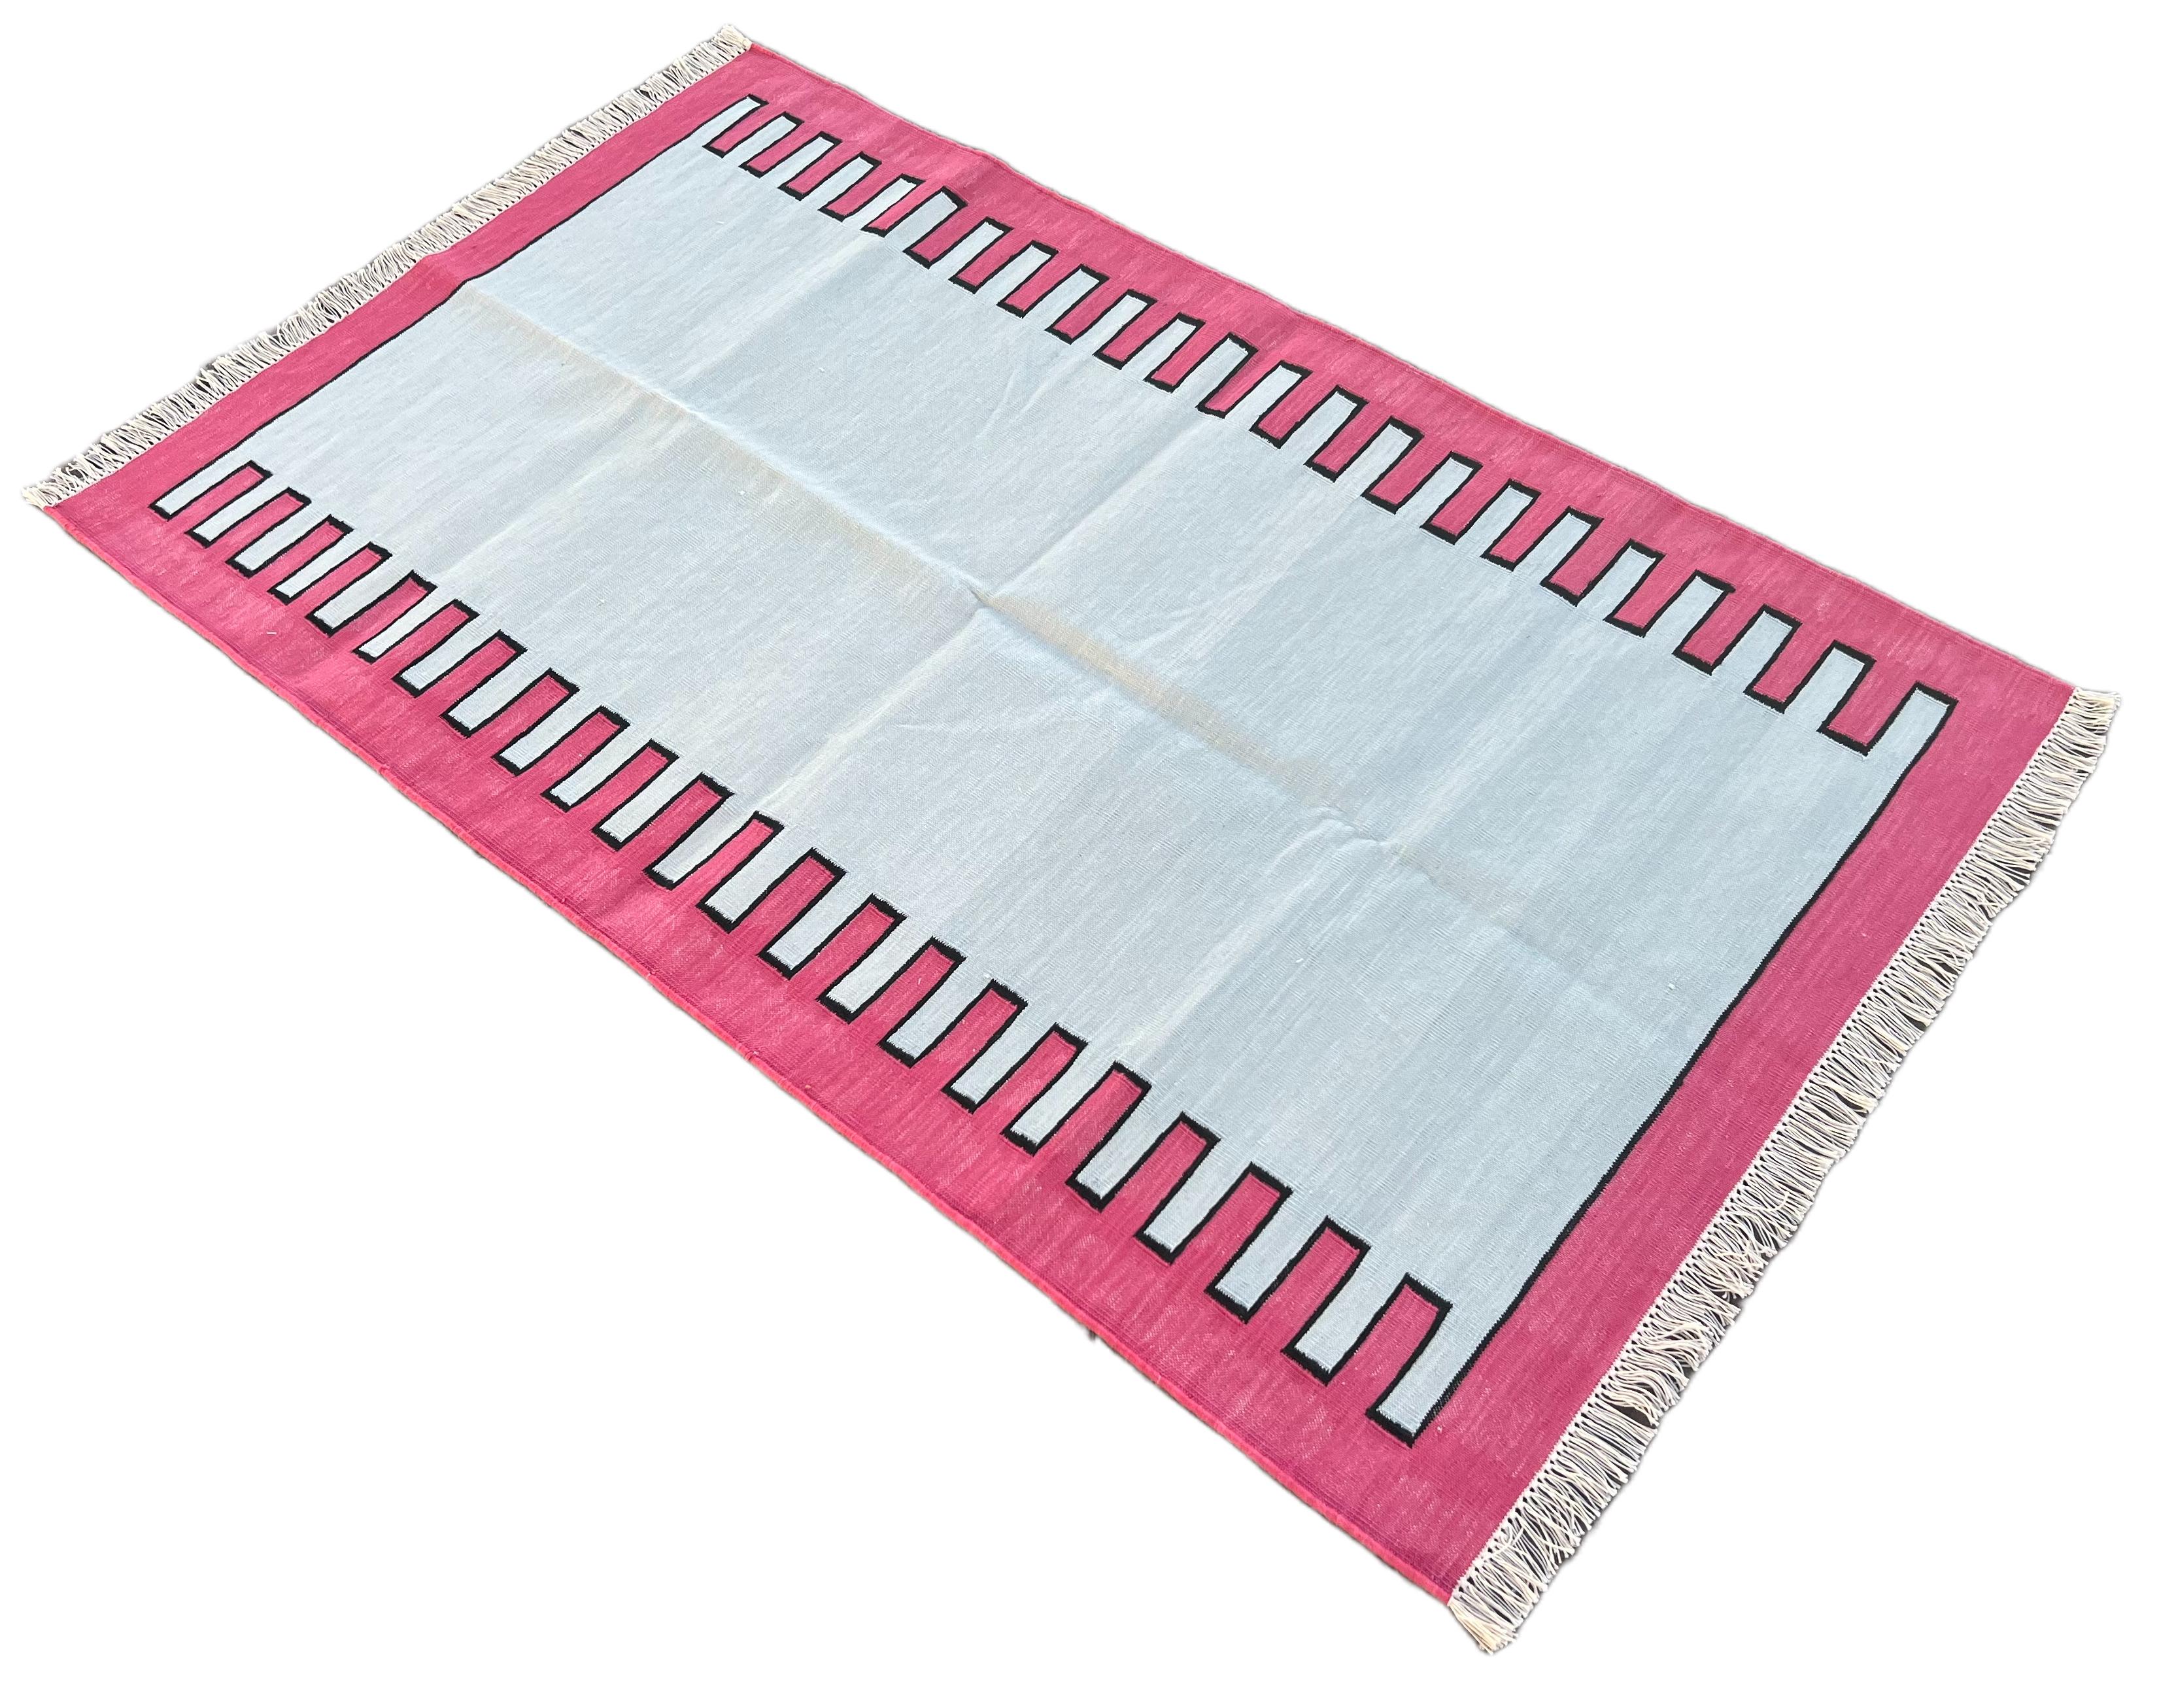 Cotton Vegetable Dyed Sky Blue And Pink Zig Zag Striped Indian Dhurrie Rug-3'x5' 
These special flat-weave dhurries are hand-woven with 15 ply 100% cotton yarn. Due to the special manufacturing techniques used to create our rugs, the size and color